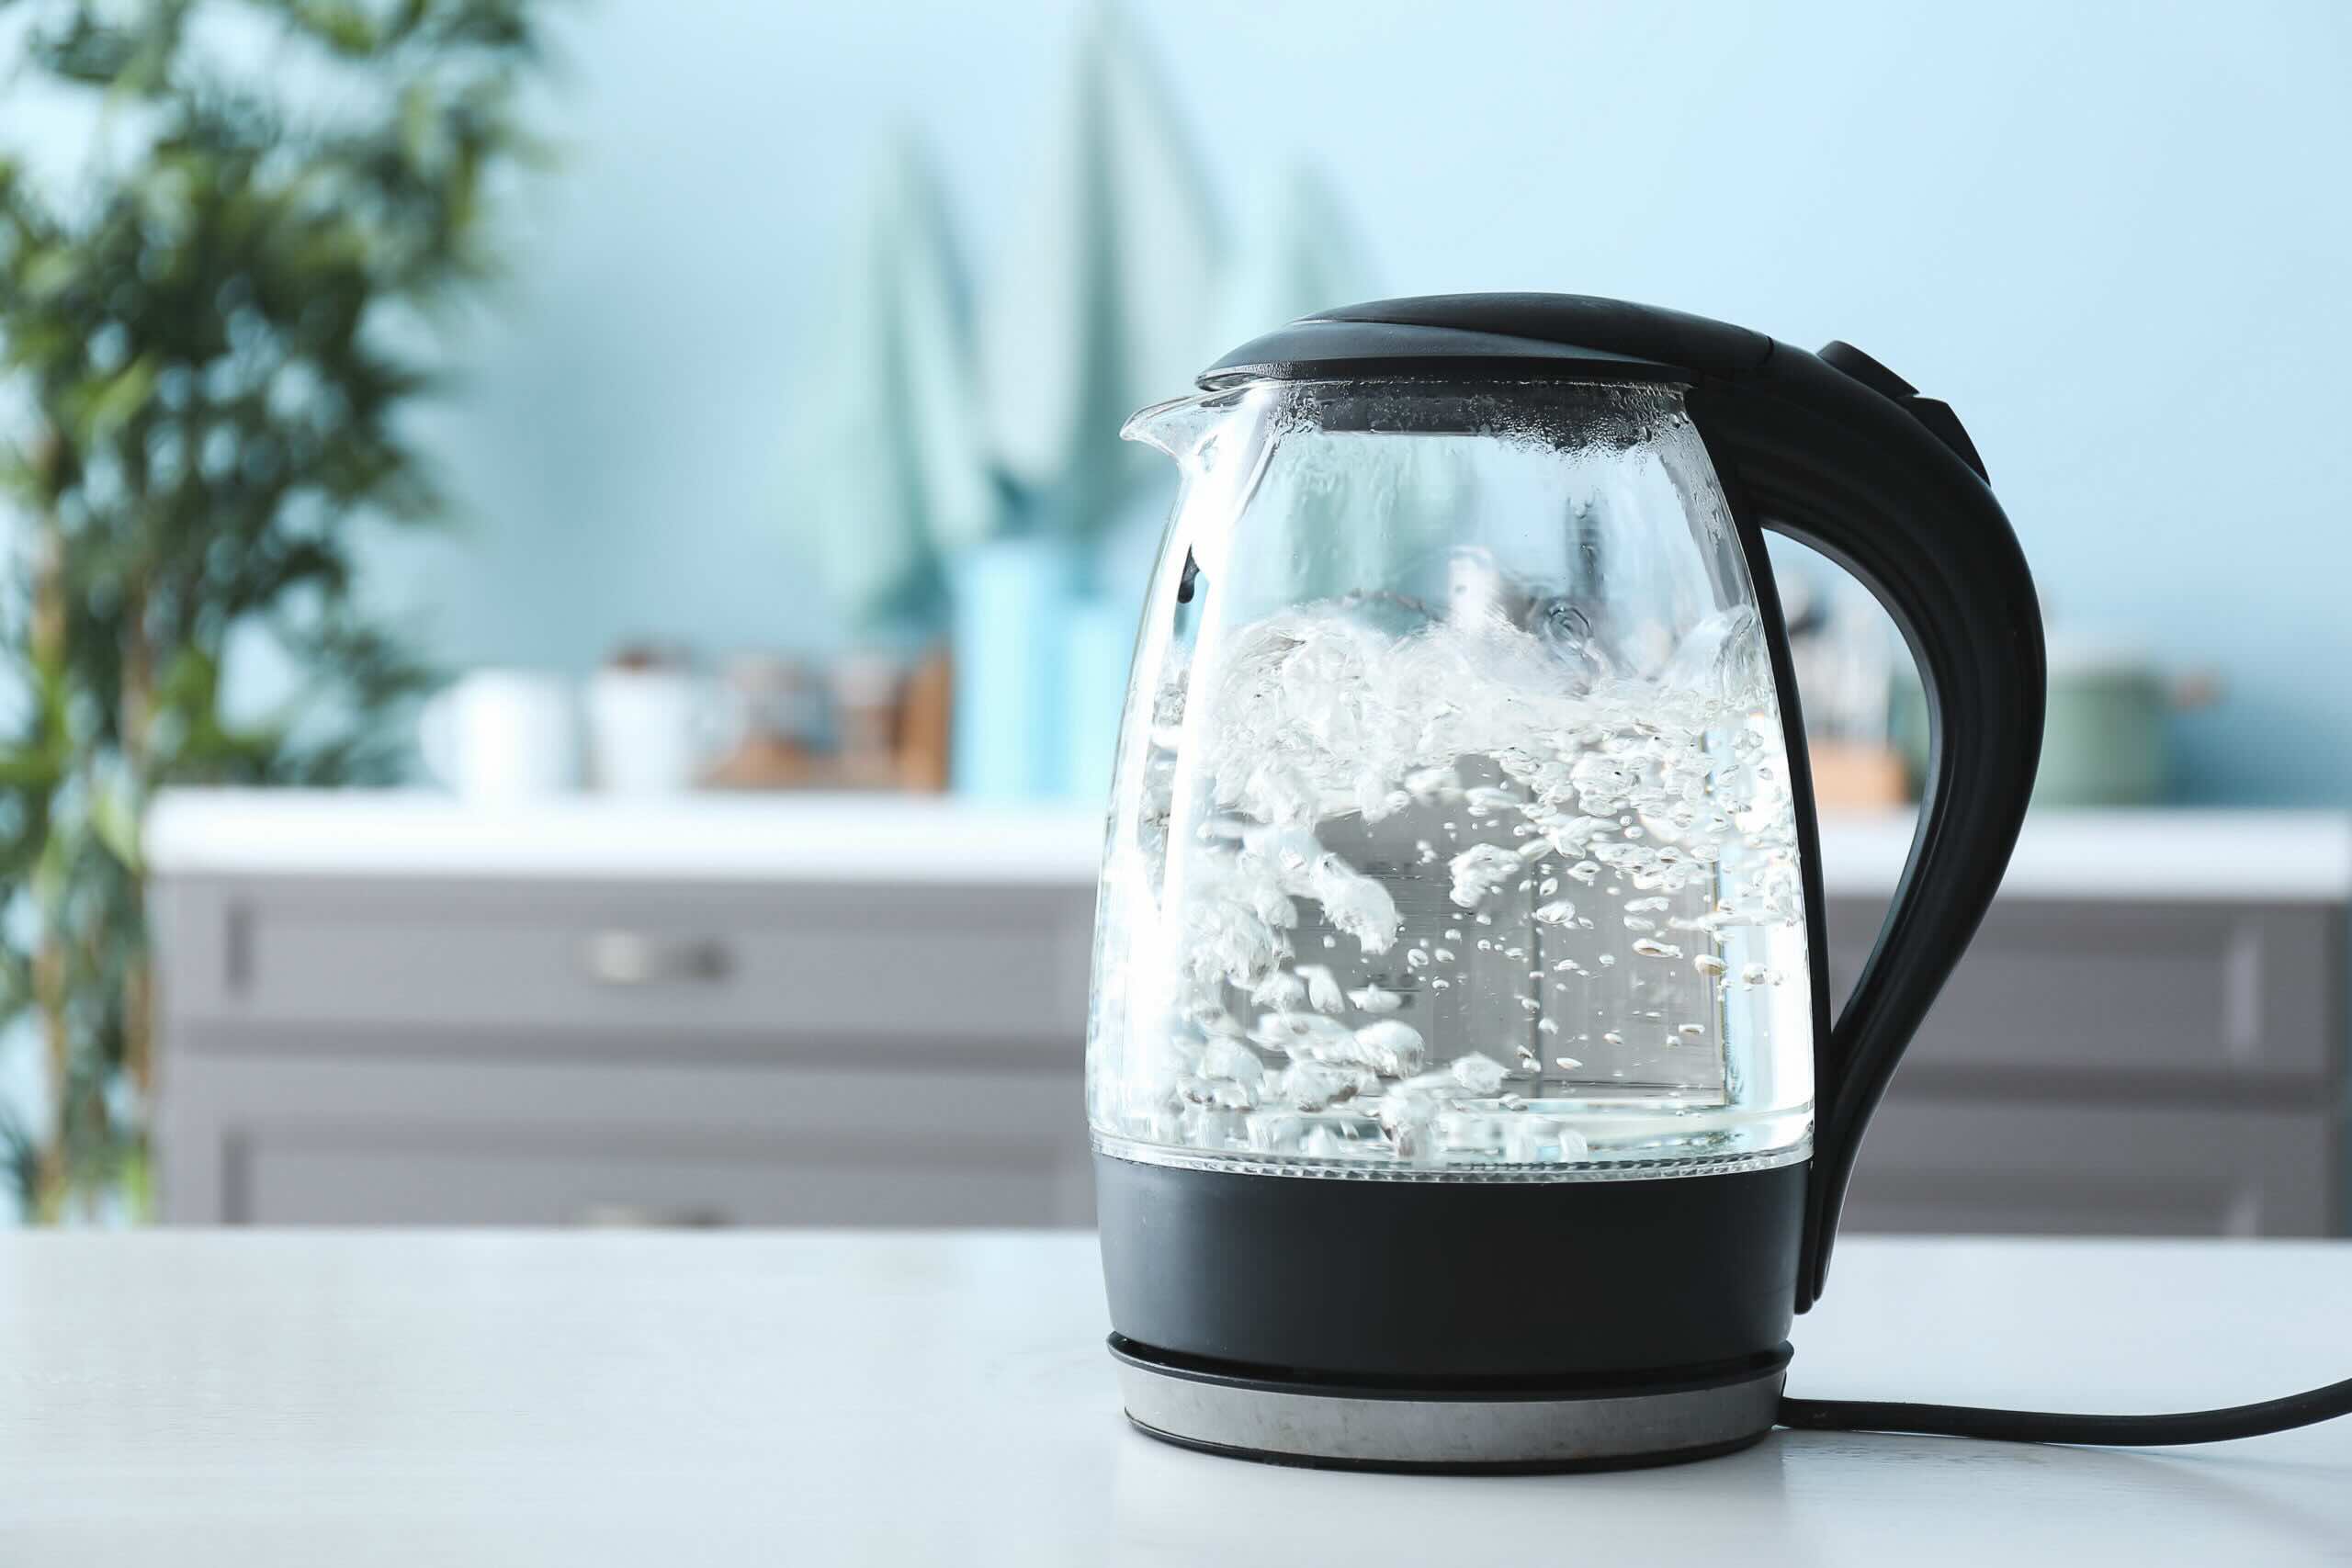 How To Use A Kettle To Boil Water